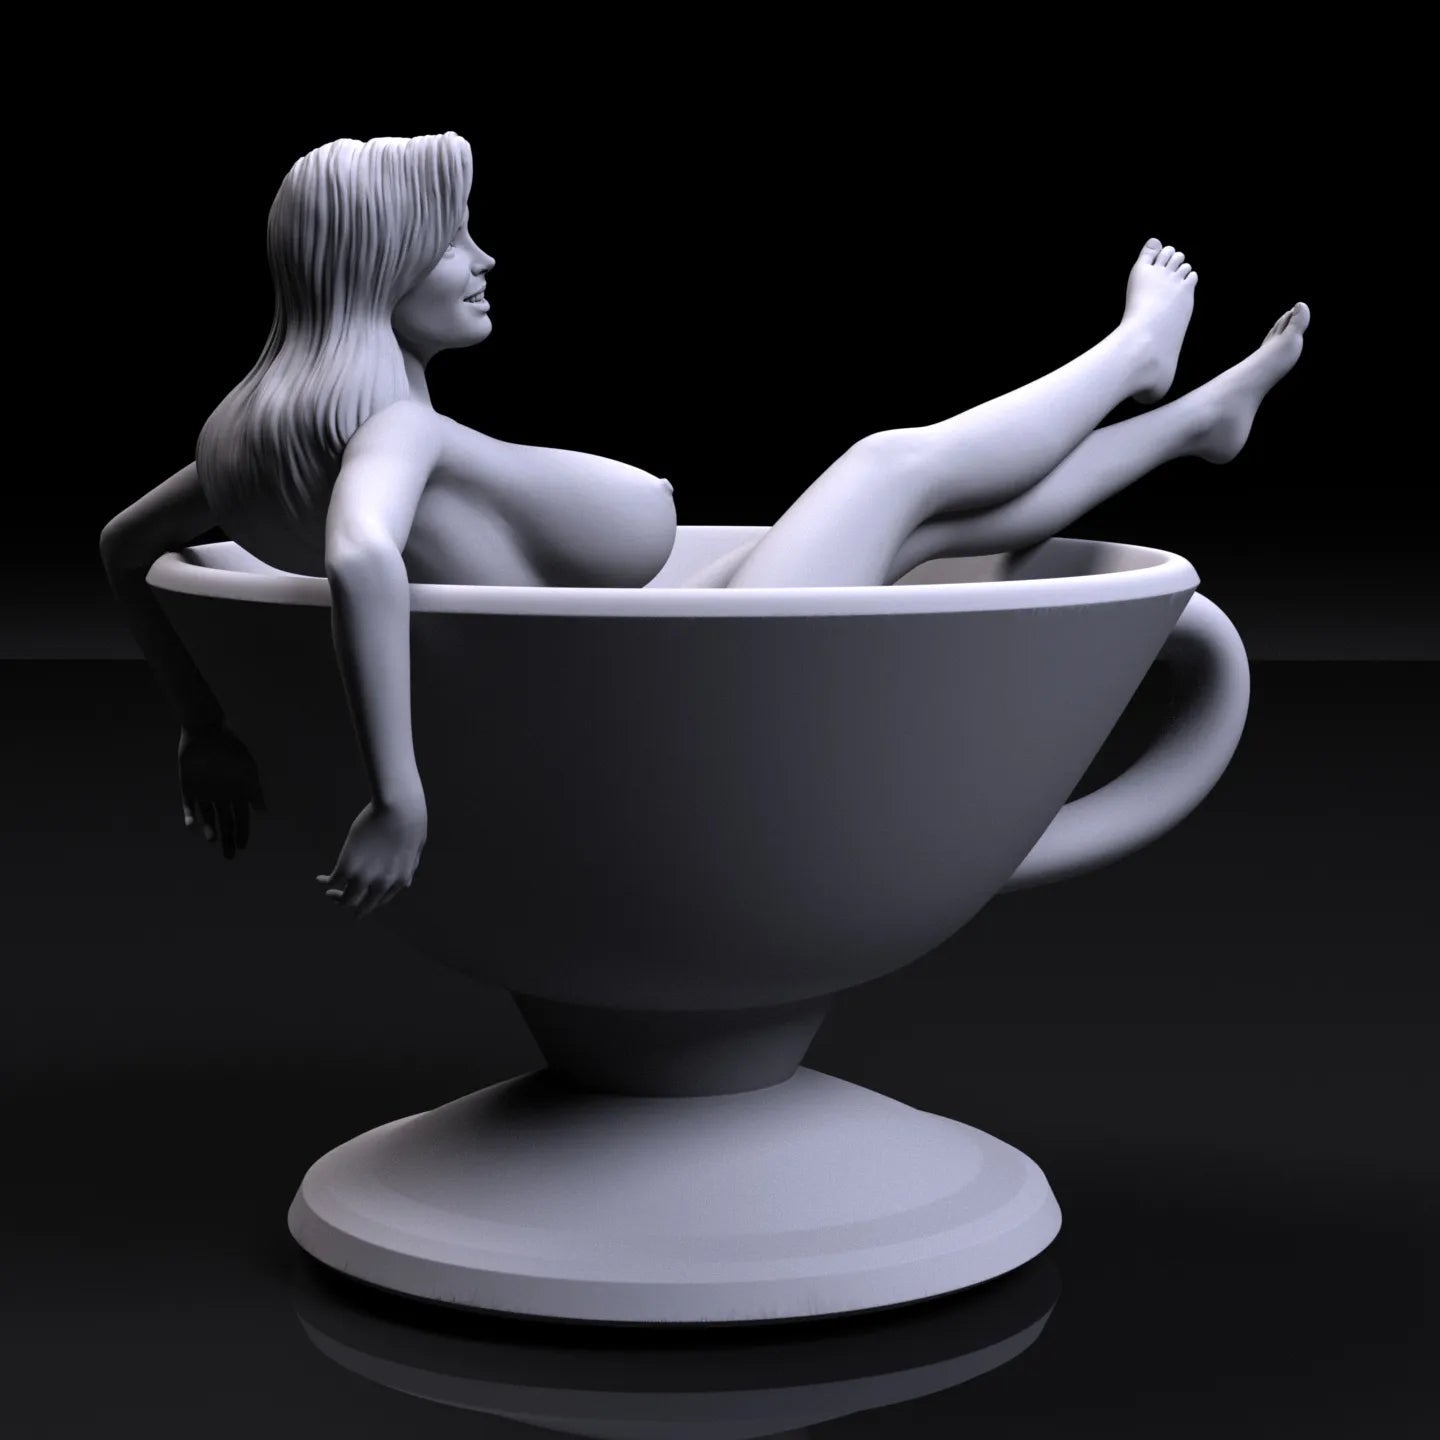 NSFW Resin Miniature Girl in Cup